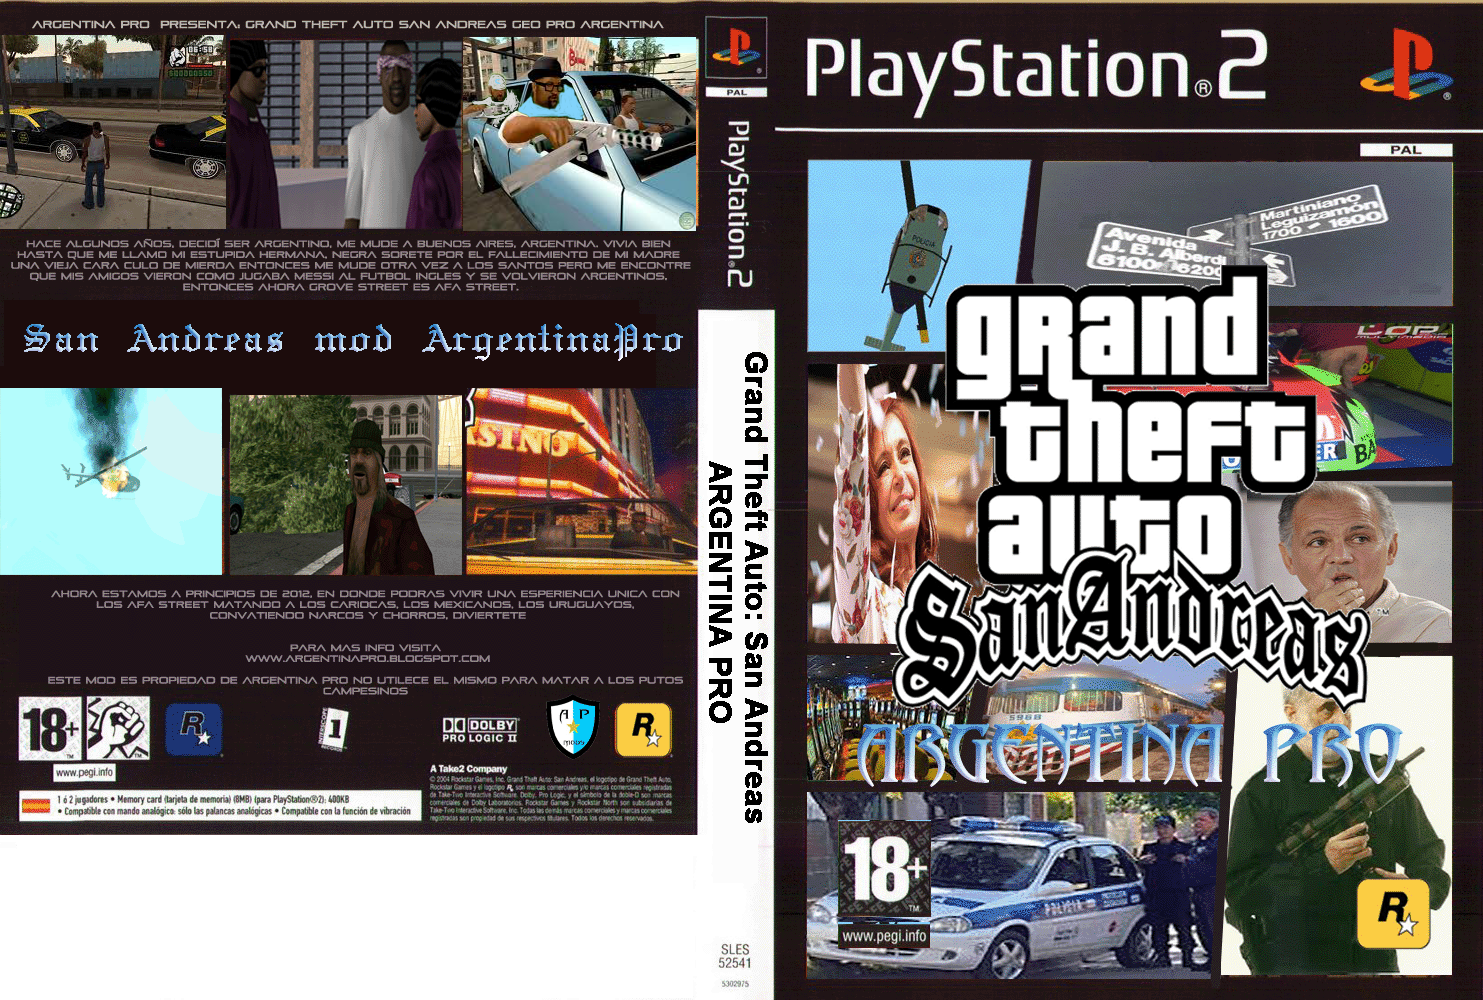 Gta san andreas online free download pc game